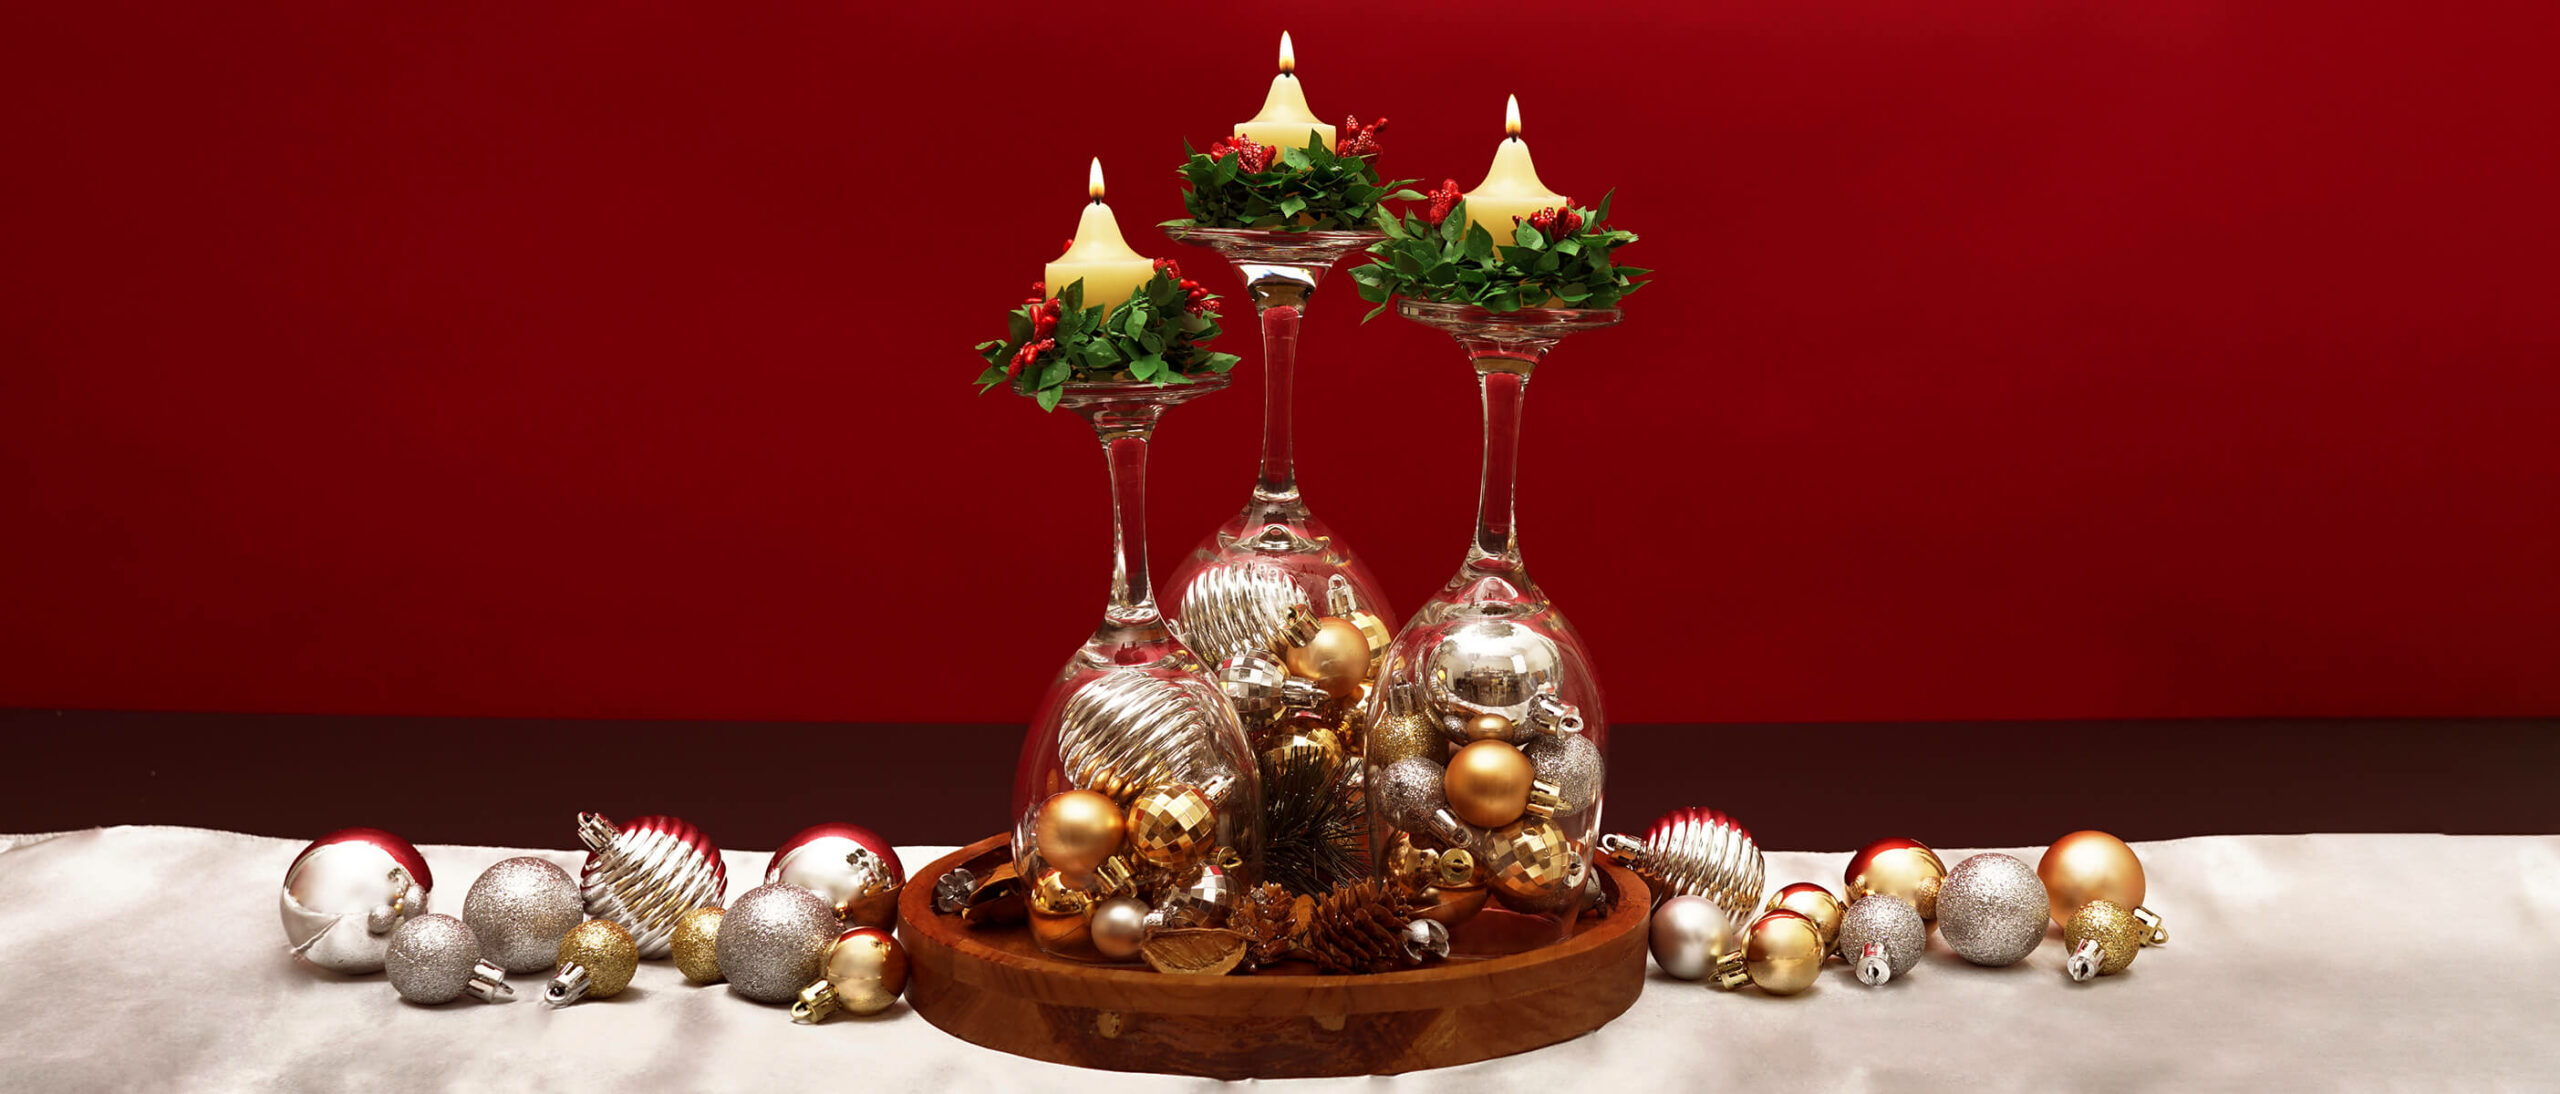 <strong>8 Simple Tips To Save Money on Holiday Decor</strong>